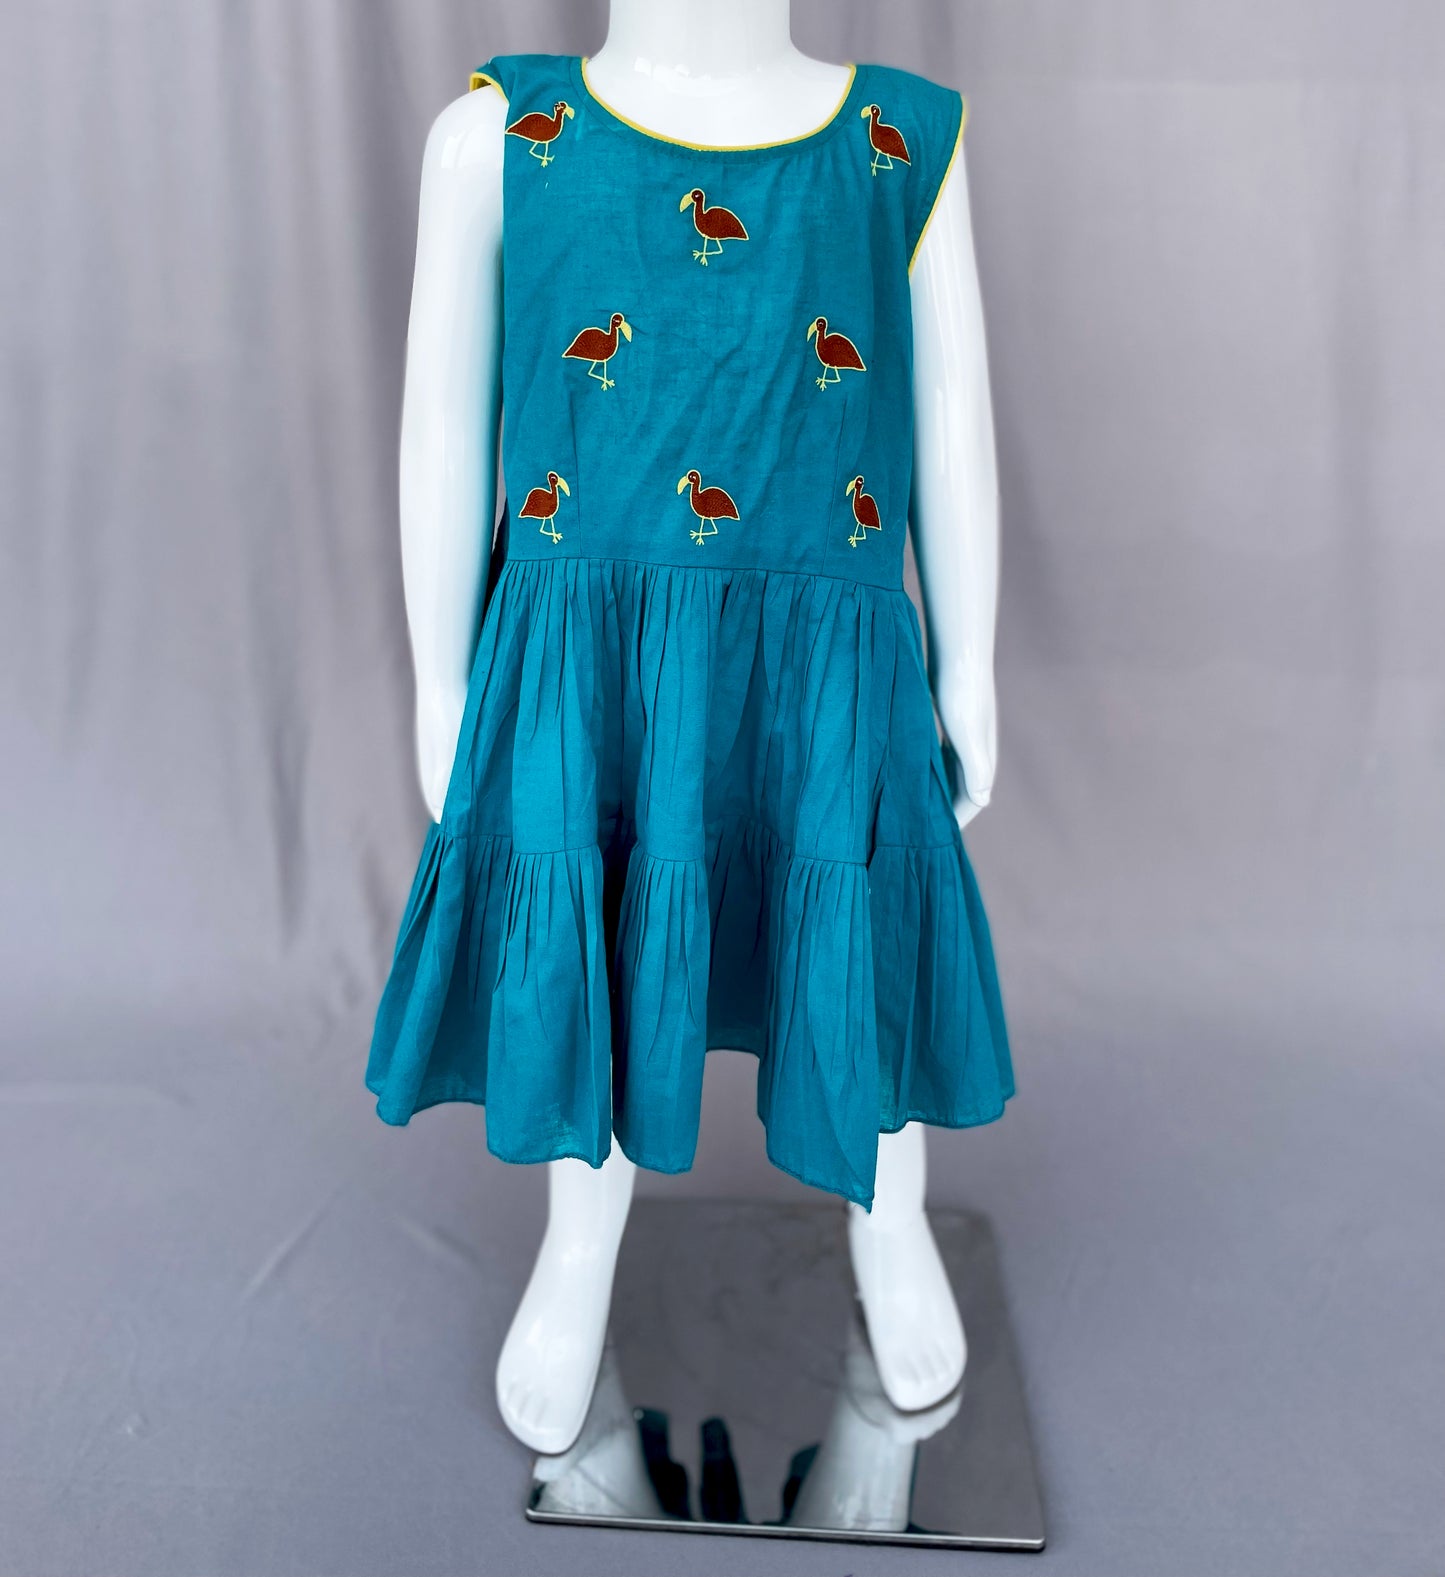 Turquoise Kids Dress, Summer wear for Girls, Frock for Girl Child, Bird Embroidery